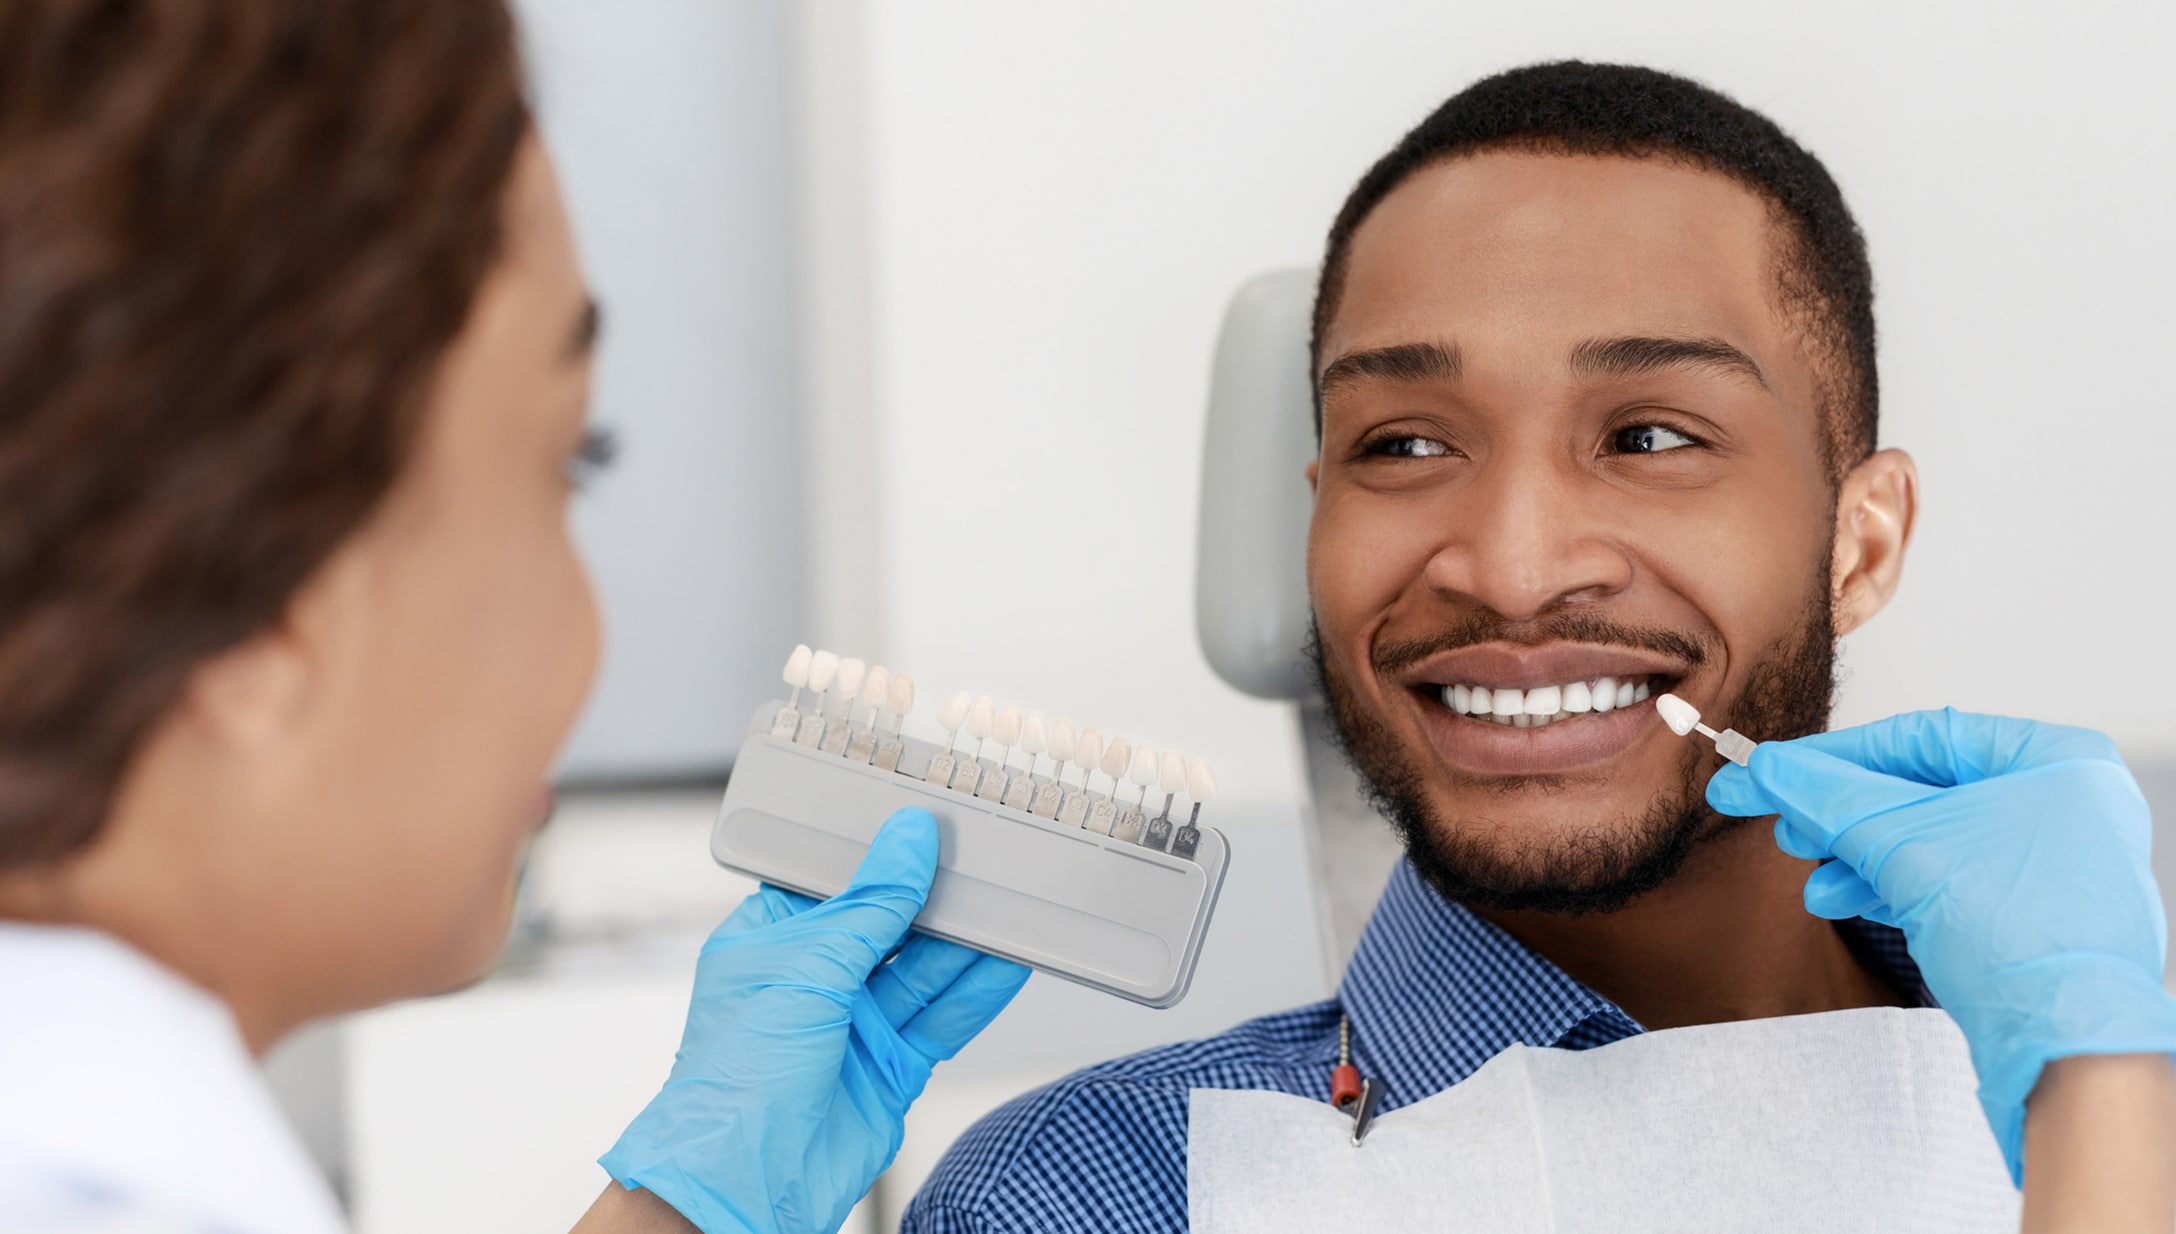 Smiling Young Man with Dental Assistant